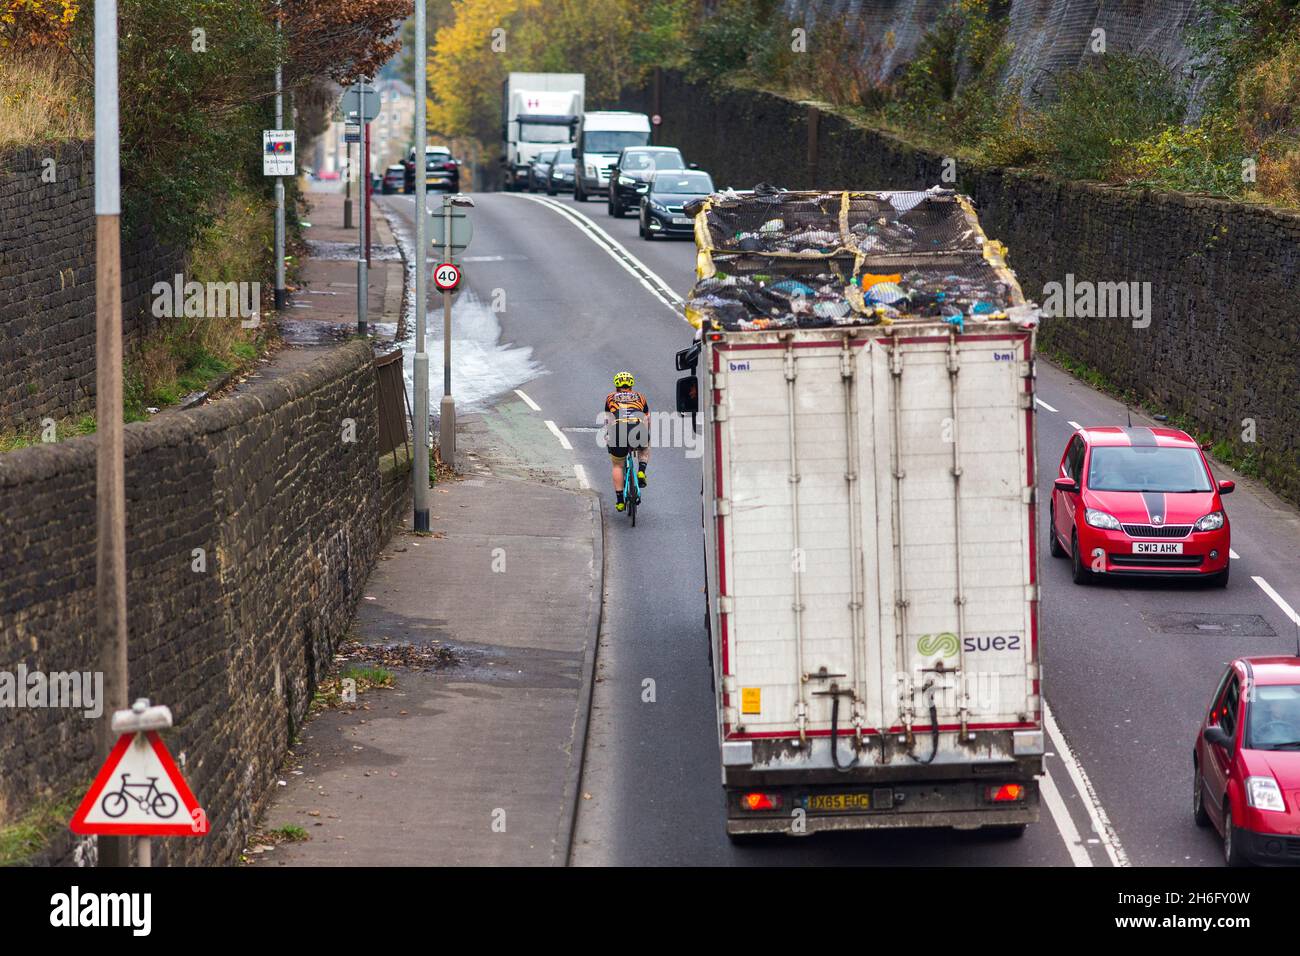 A cyclist passed closely by a waste recycling truck near Halifax, Calderdale, West Yorkshire .Close passes are not only really intimidating, but also dangerous: police attribute 'passing too close to the cyclist' as a contributory factor in a staggering 25% of serious collisions between cyclists and large vehicles. At the same time, we know that 62% of people in the UK consider cycling on the roads ‘too dangerous’. If we want safer roads for cyclists as well as more people cycling, putting an end to close passing is absolutely key, Stock Photo